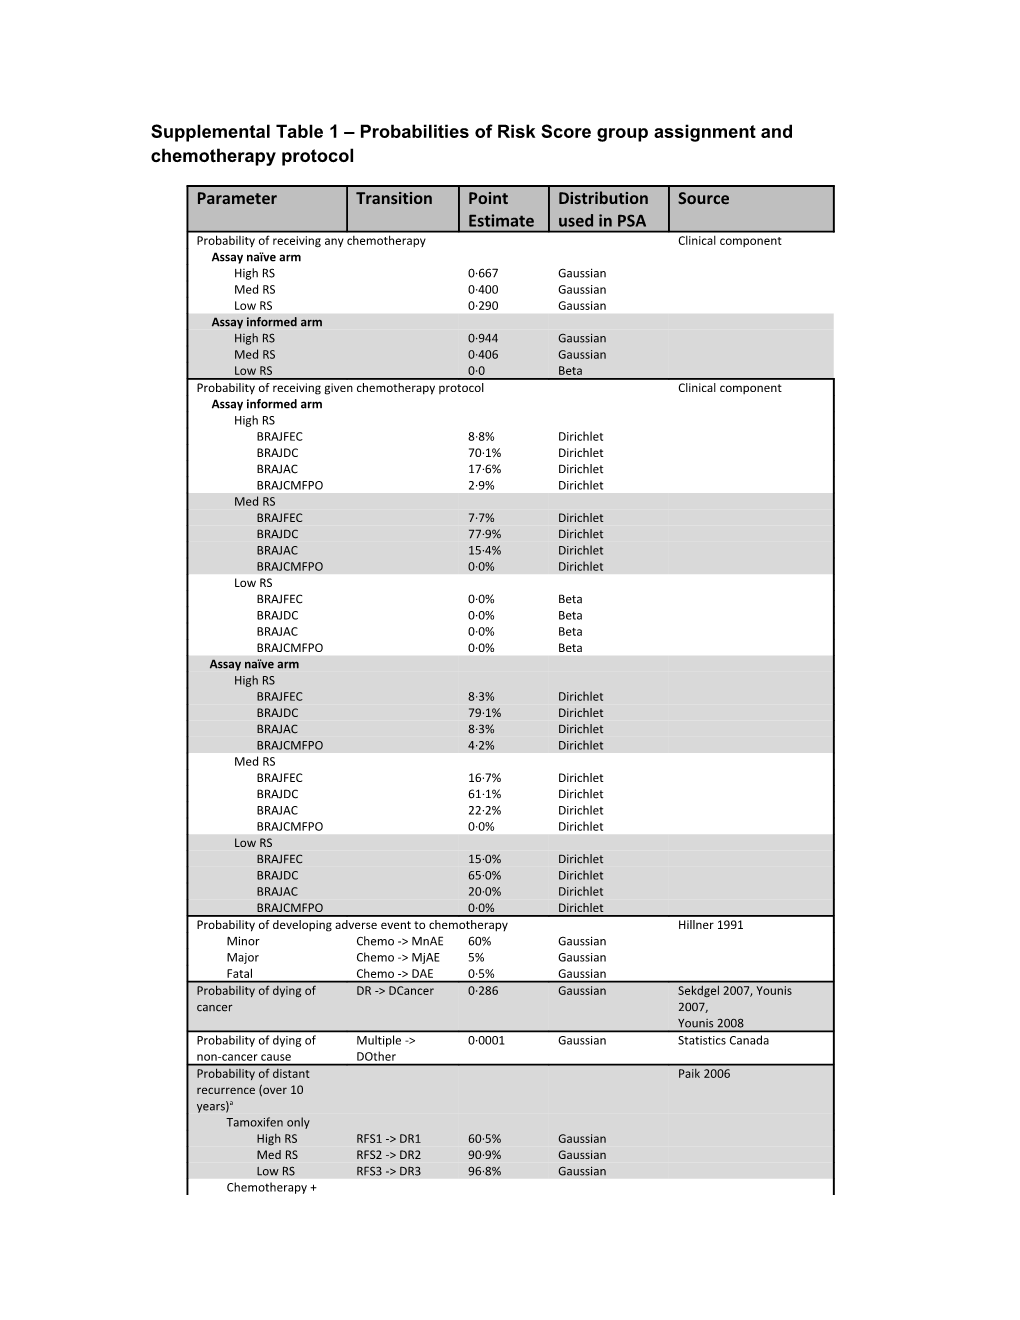 Supplementaltable 1 Probabilities of Risk Score Group Assignment and Chemotherapy Protocol